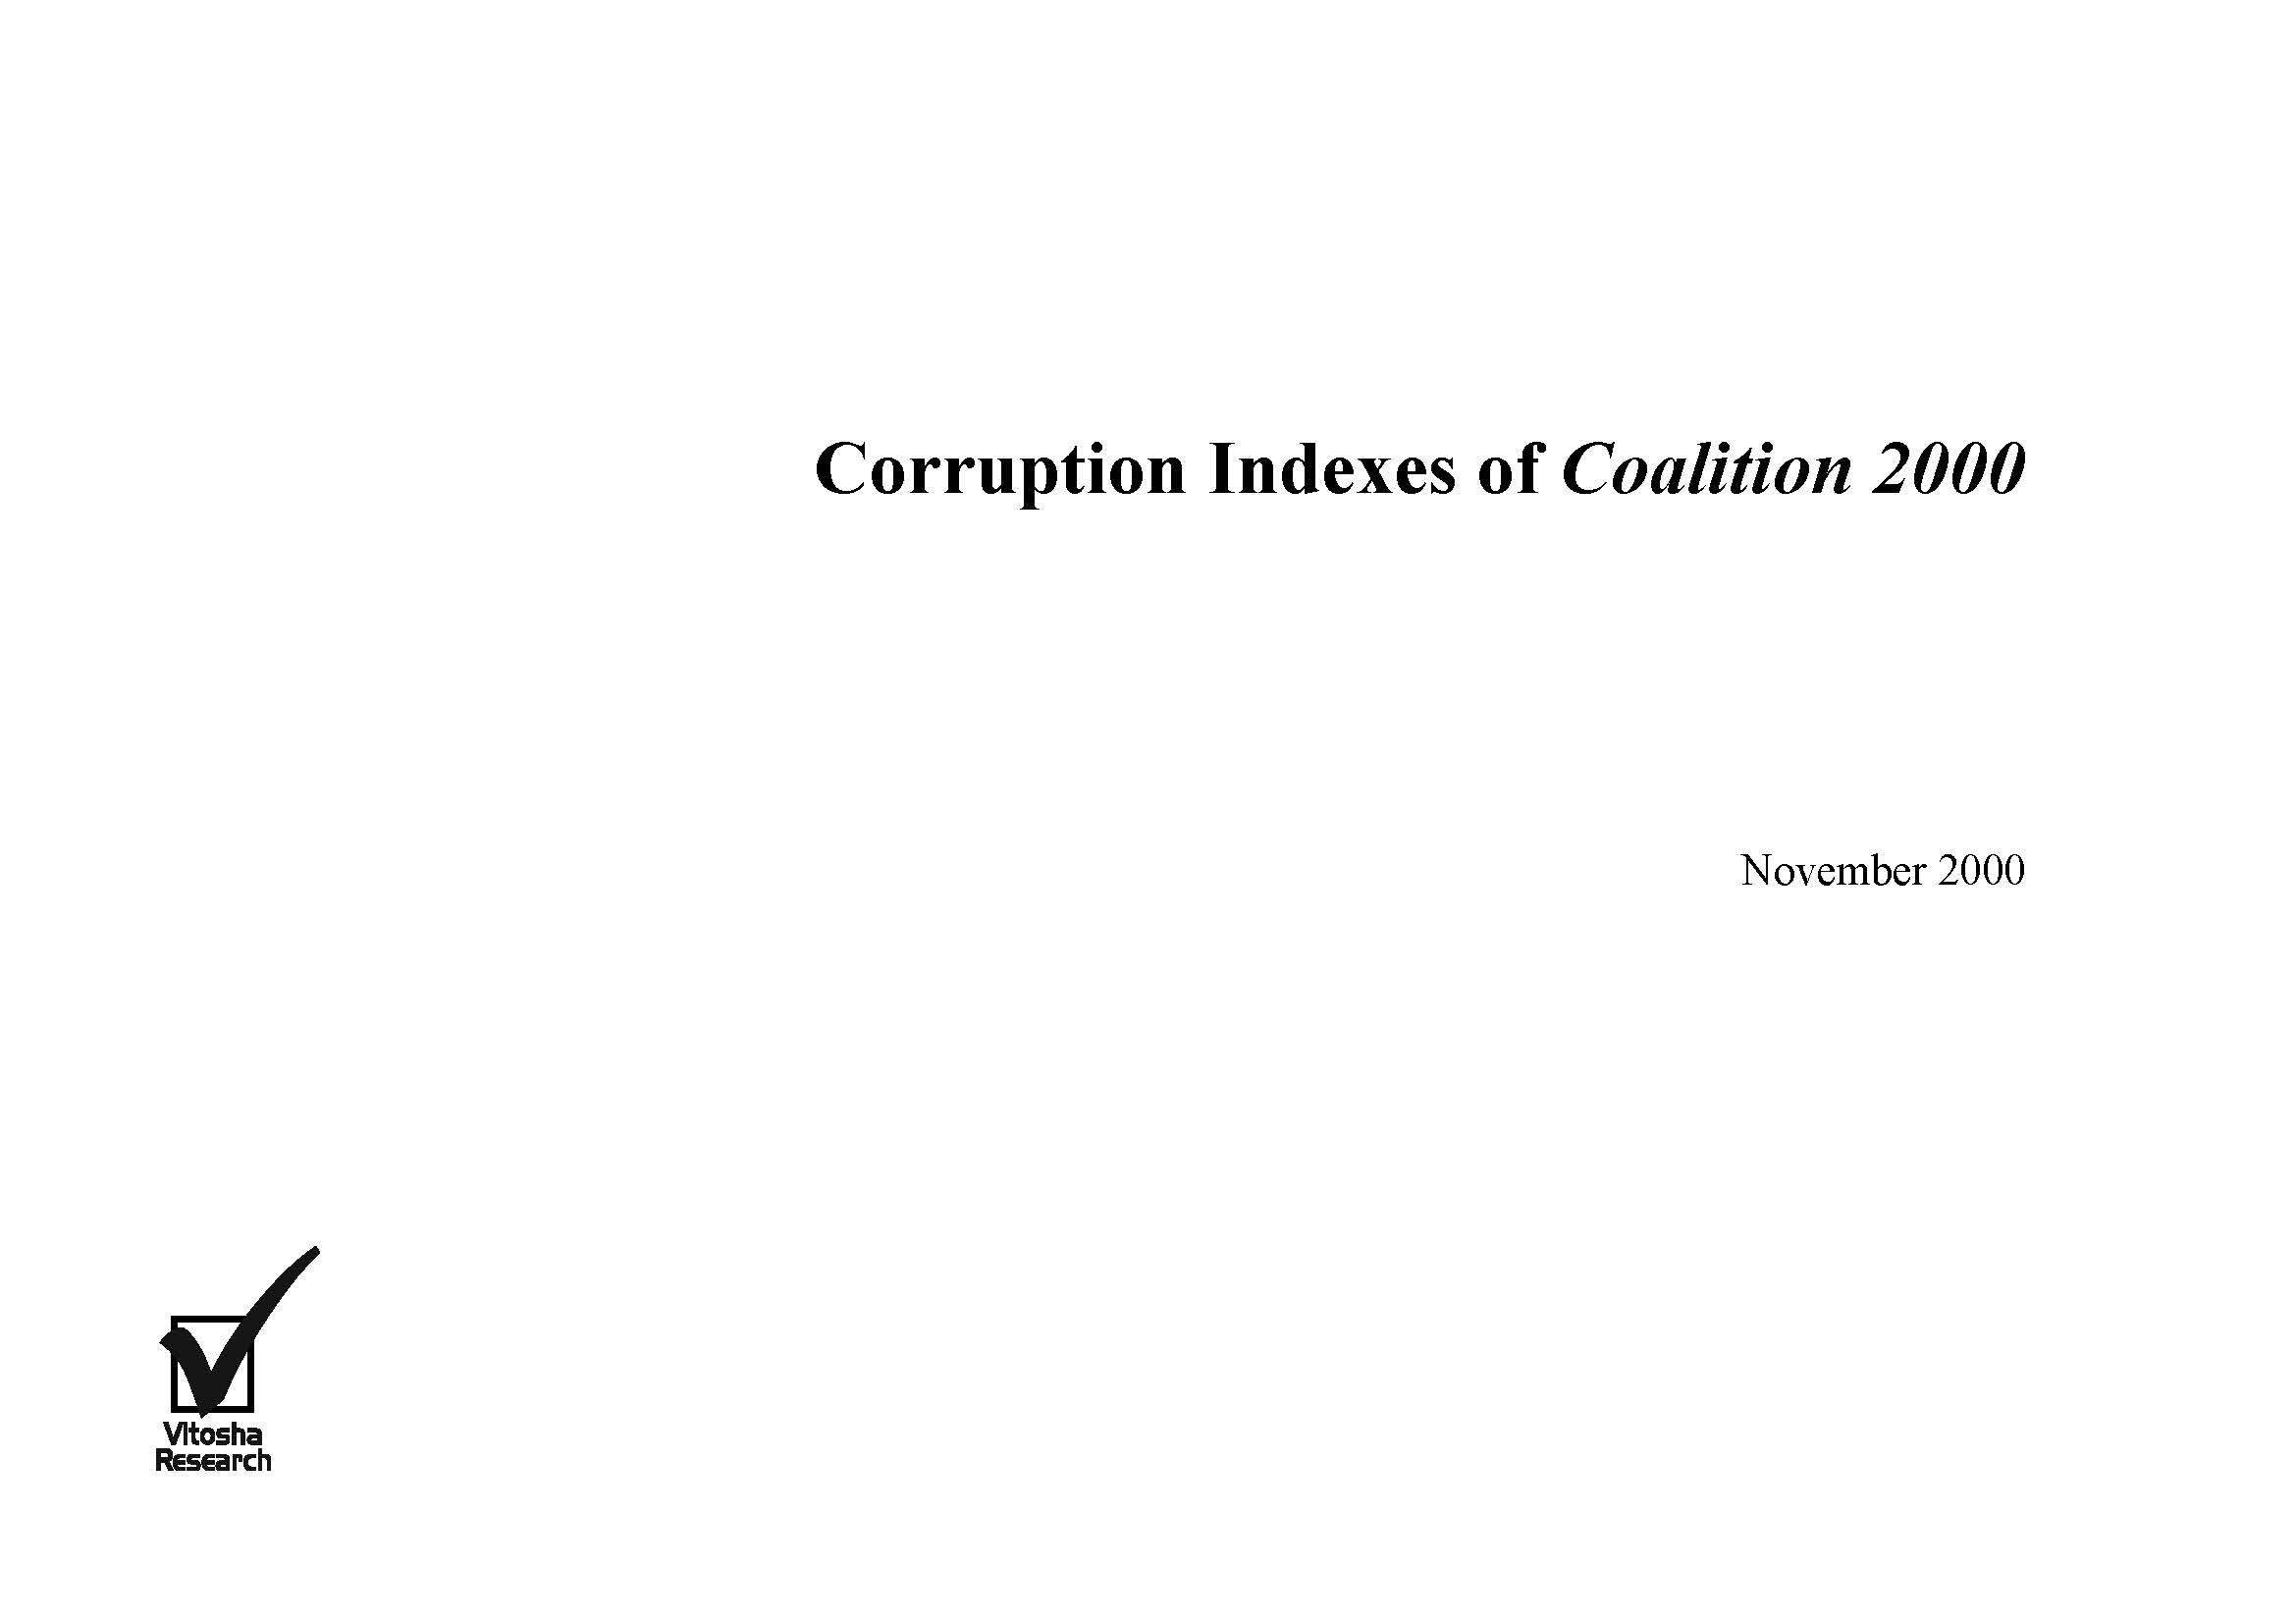 Corruption Indexes of Coalition 2000, November 2000